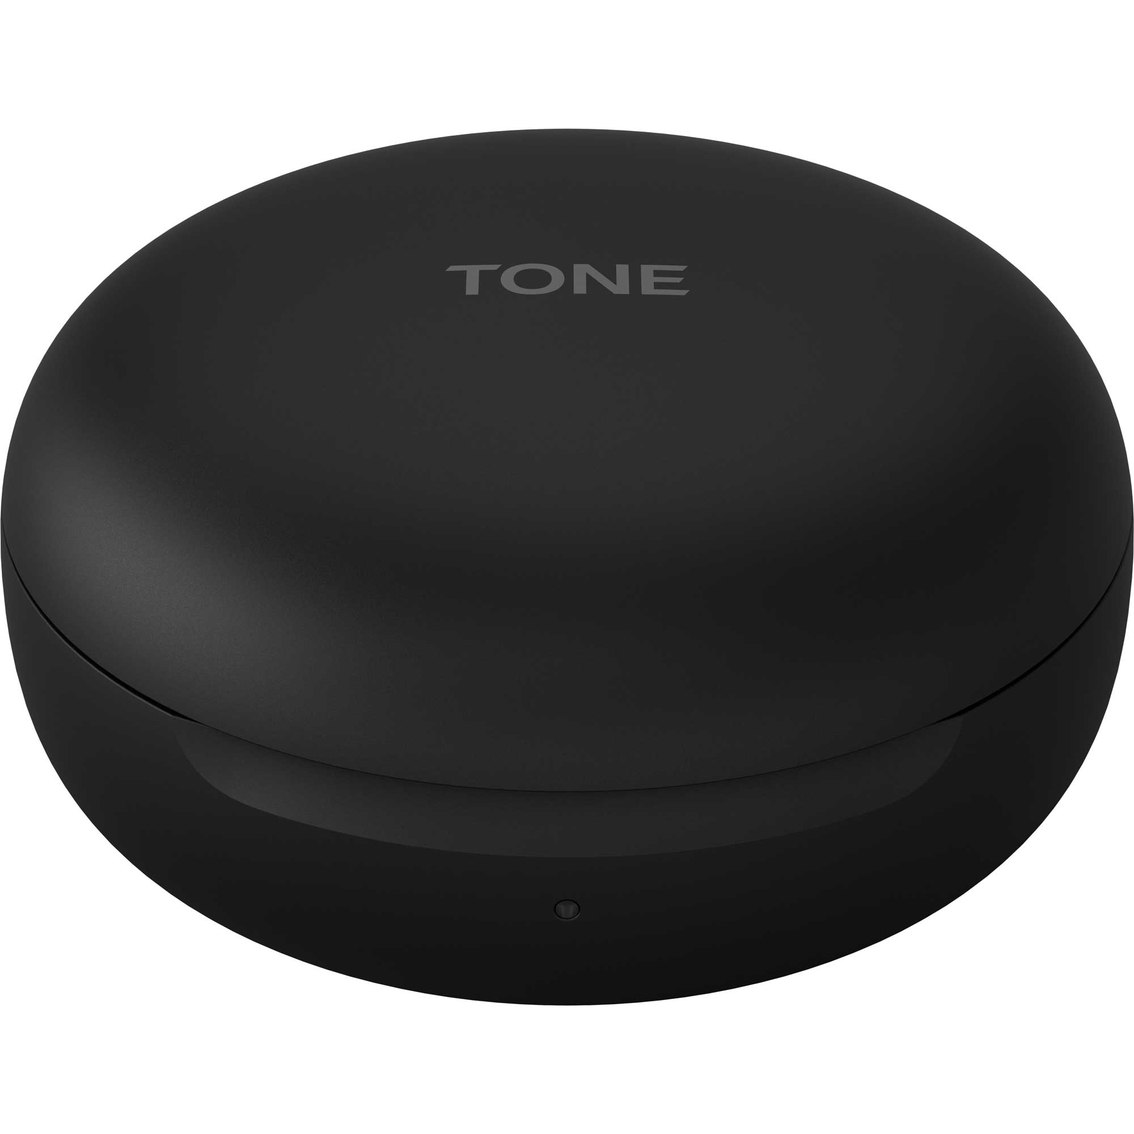 LG Tone Free Wireless Earbuds with Charging Case - Image 6 of 6